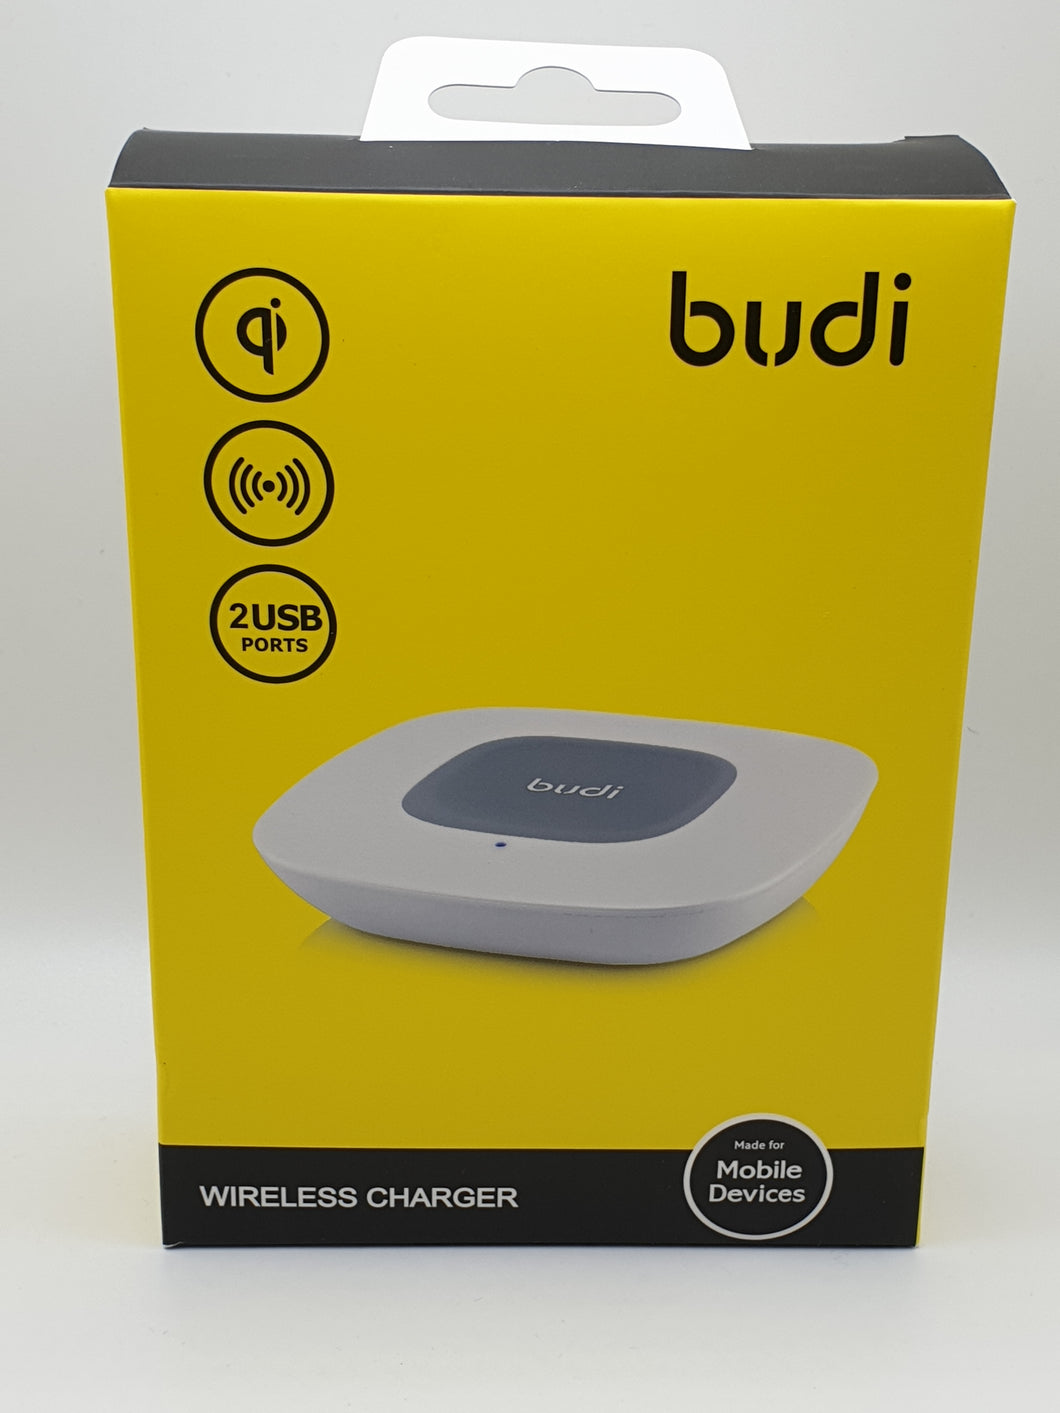 Budi Wireless Charger 2x USB Chargepad Qi Devices Smartphones